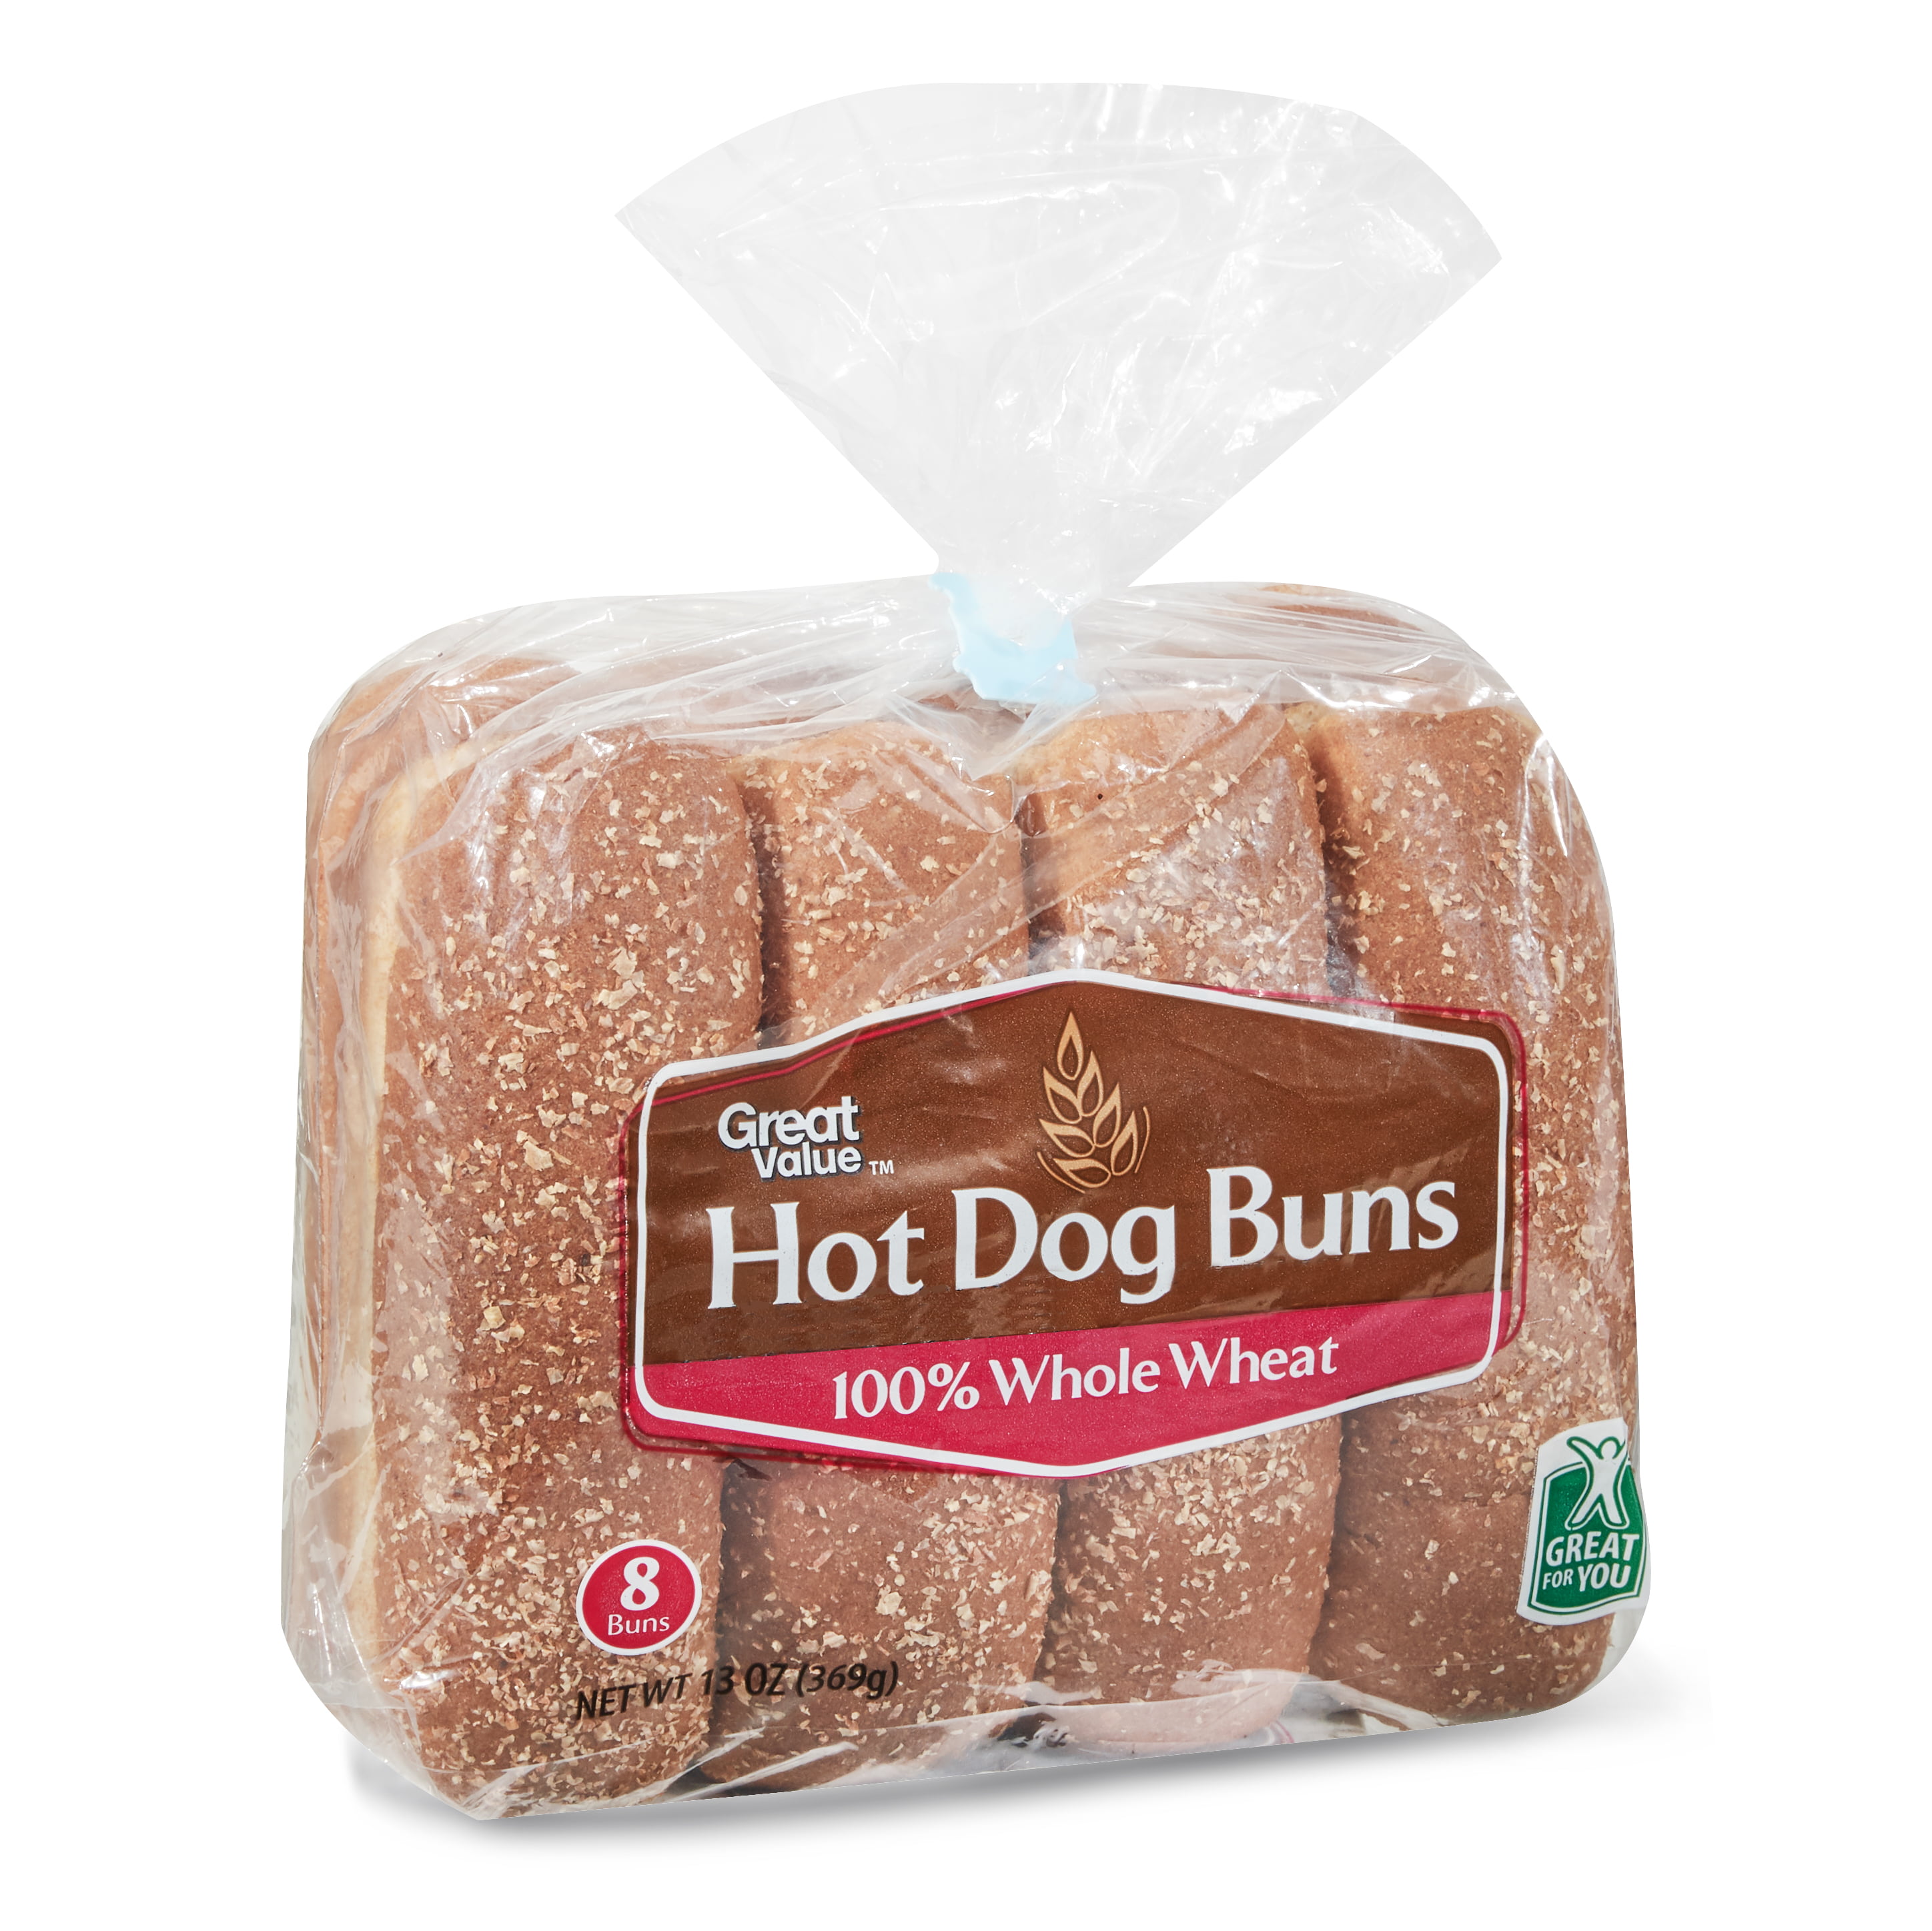 Great Value 100% Whole Wheat Hot Dog Buns, 8 ct 